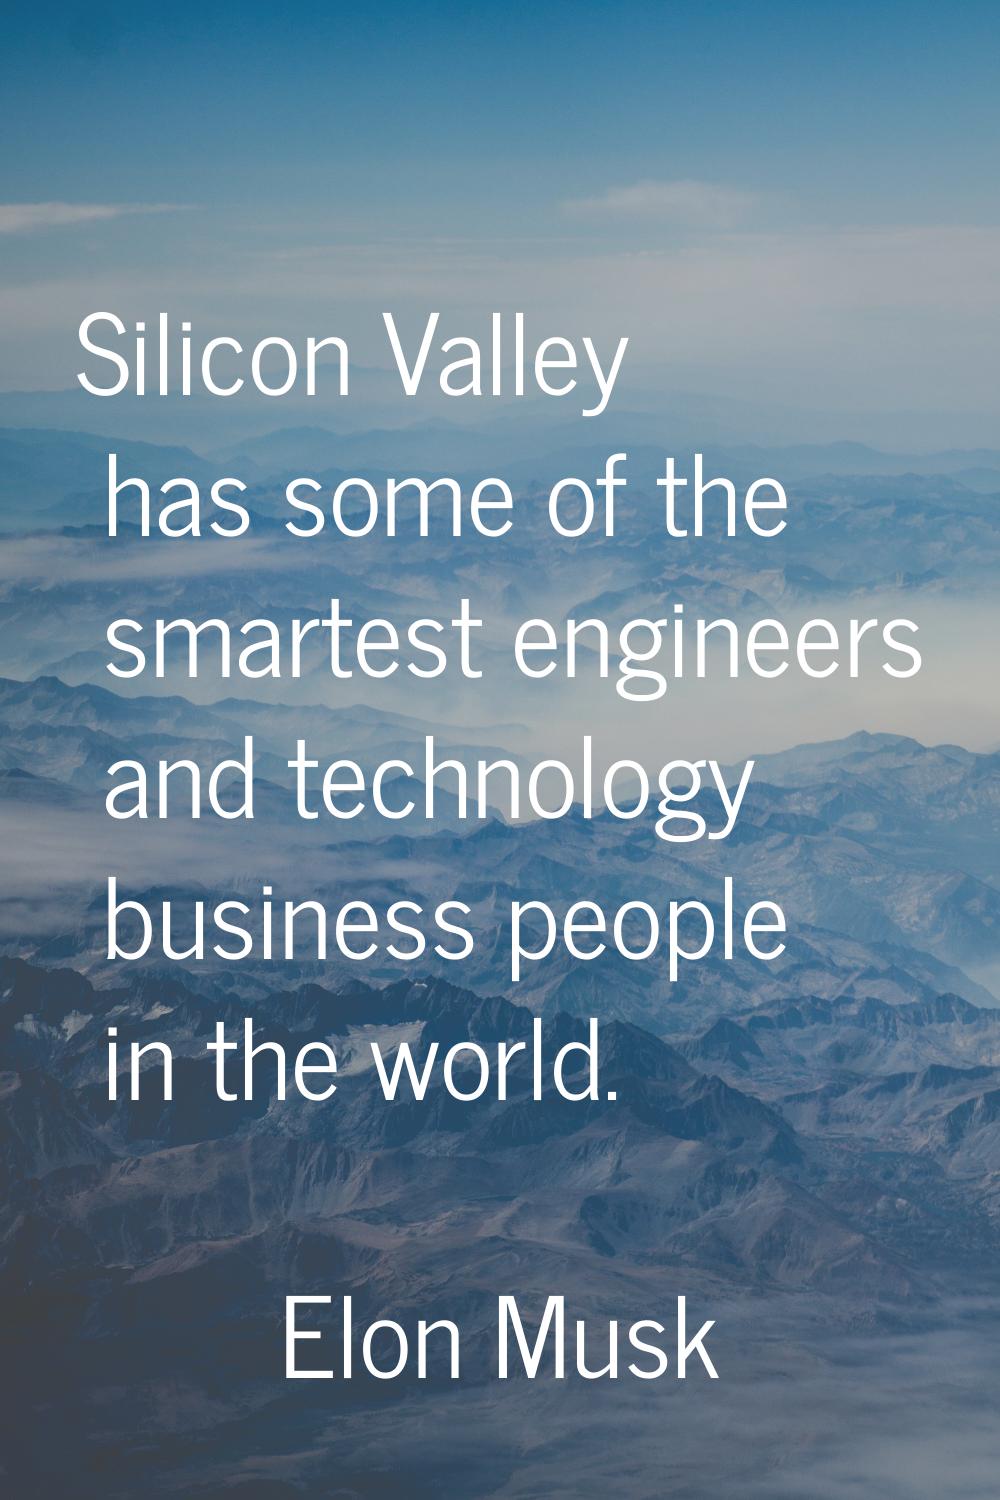 Silicon Valley has some of the smartest engineers and technology business people in the world.